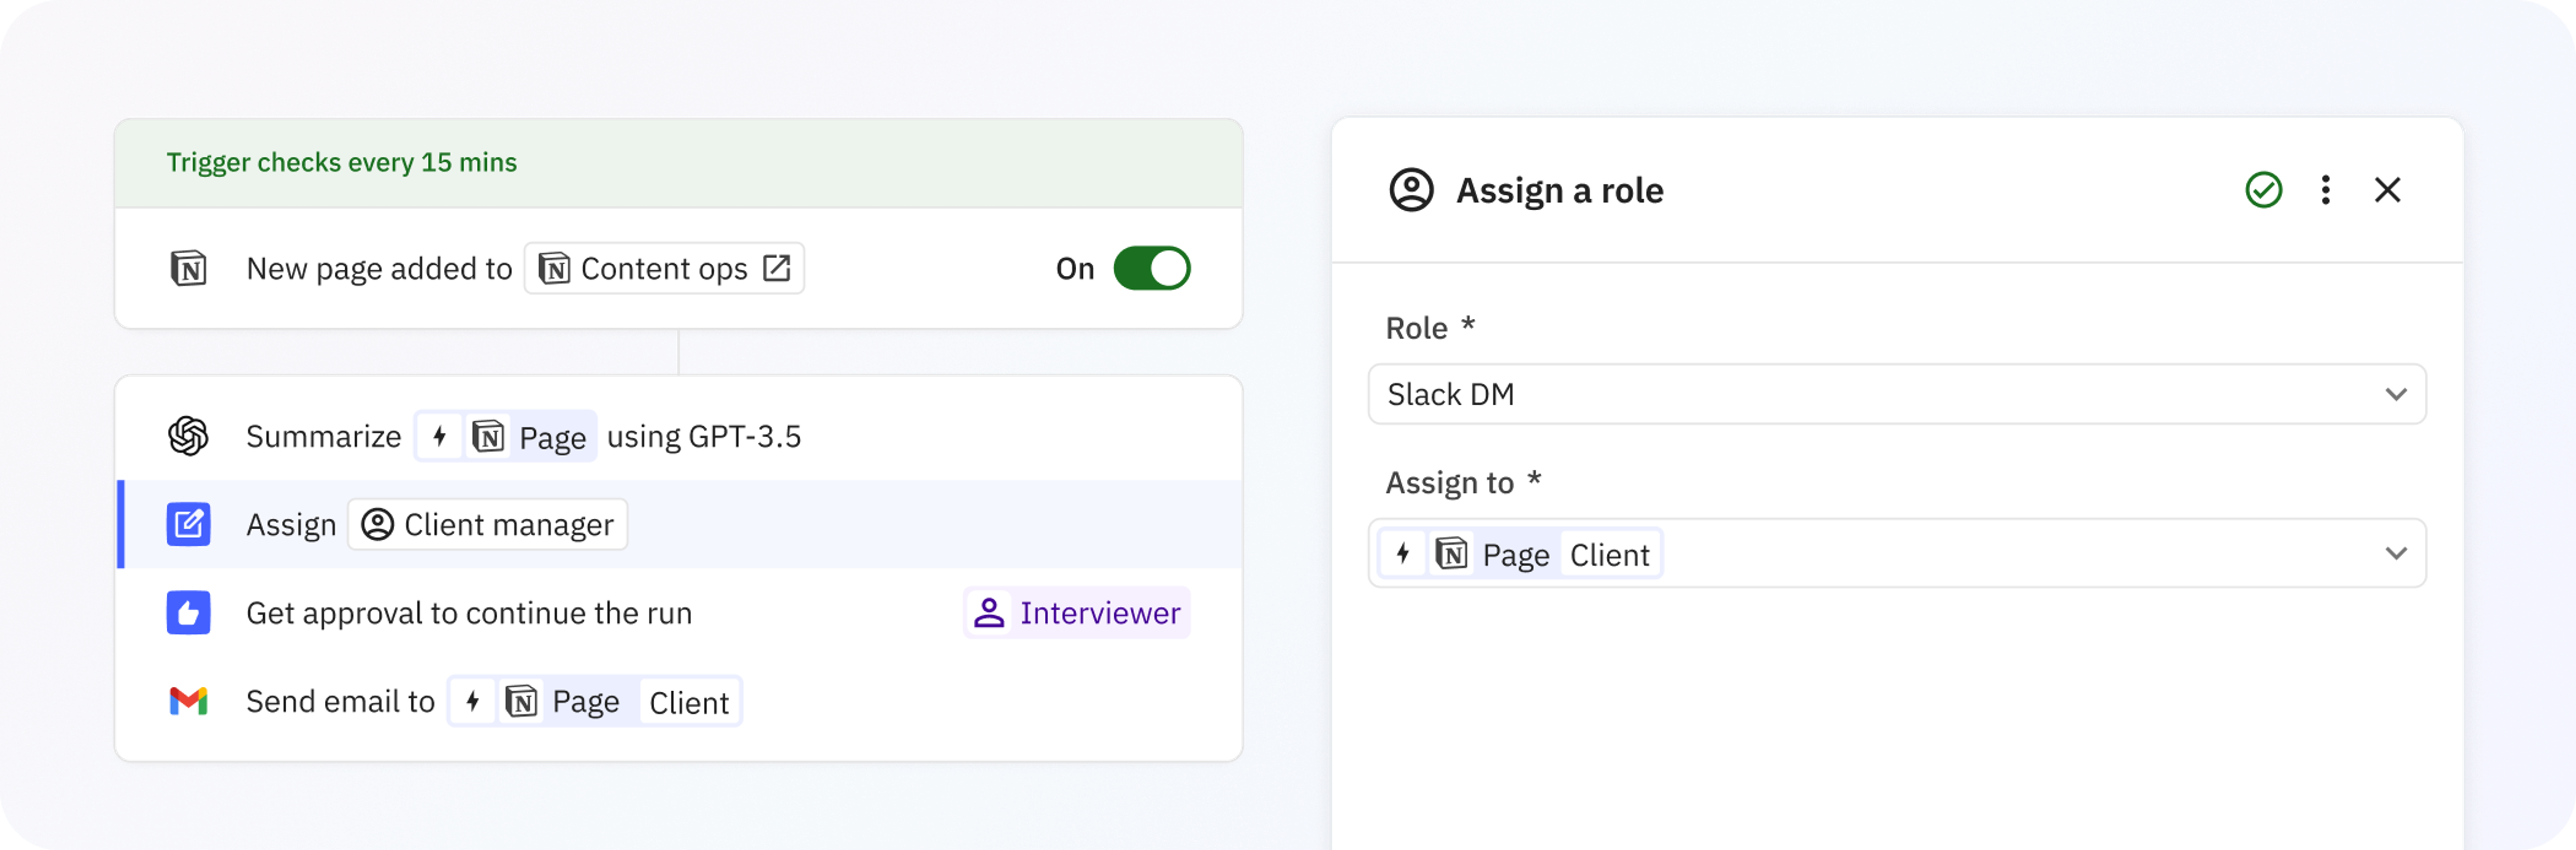 Screenshot of human-in-the-loop role assignment in Relay.app